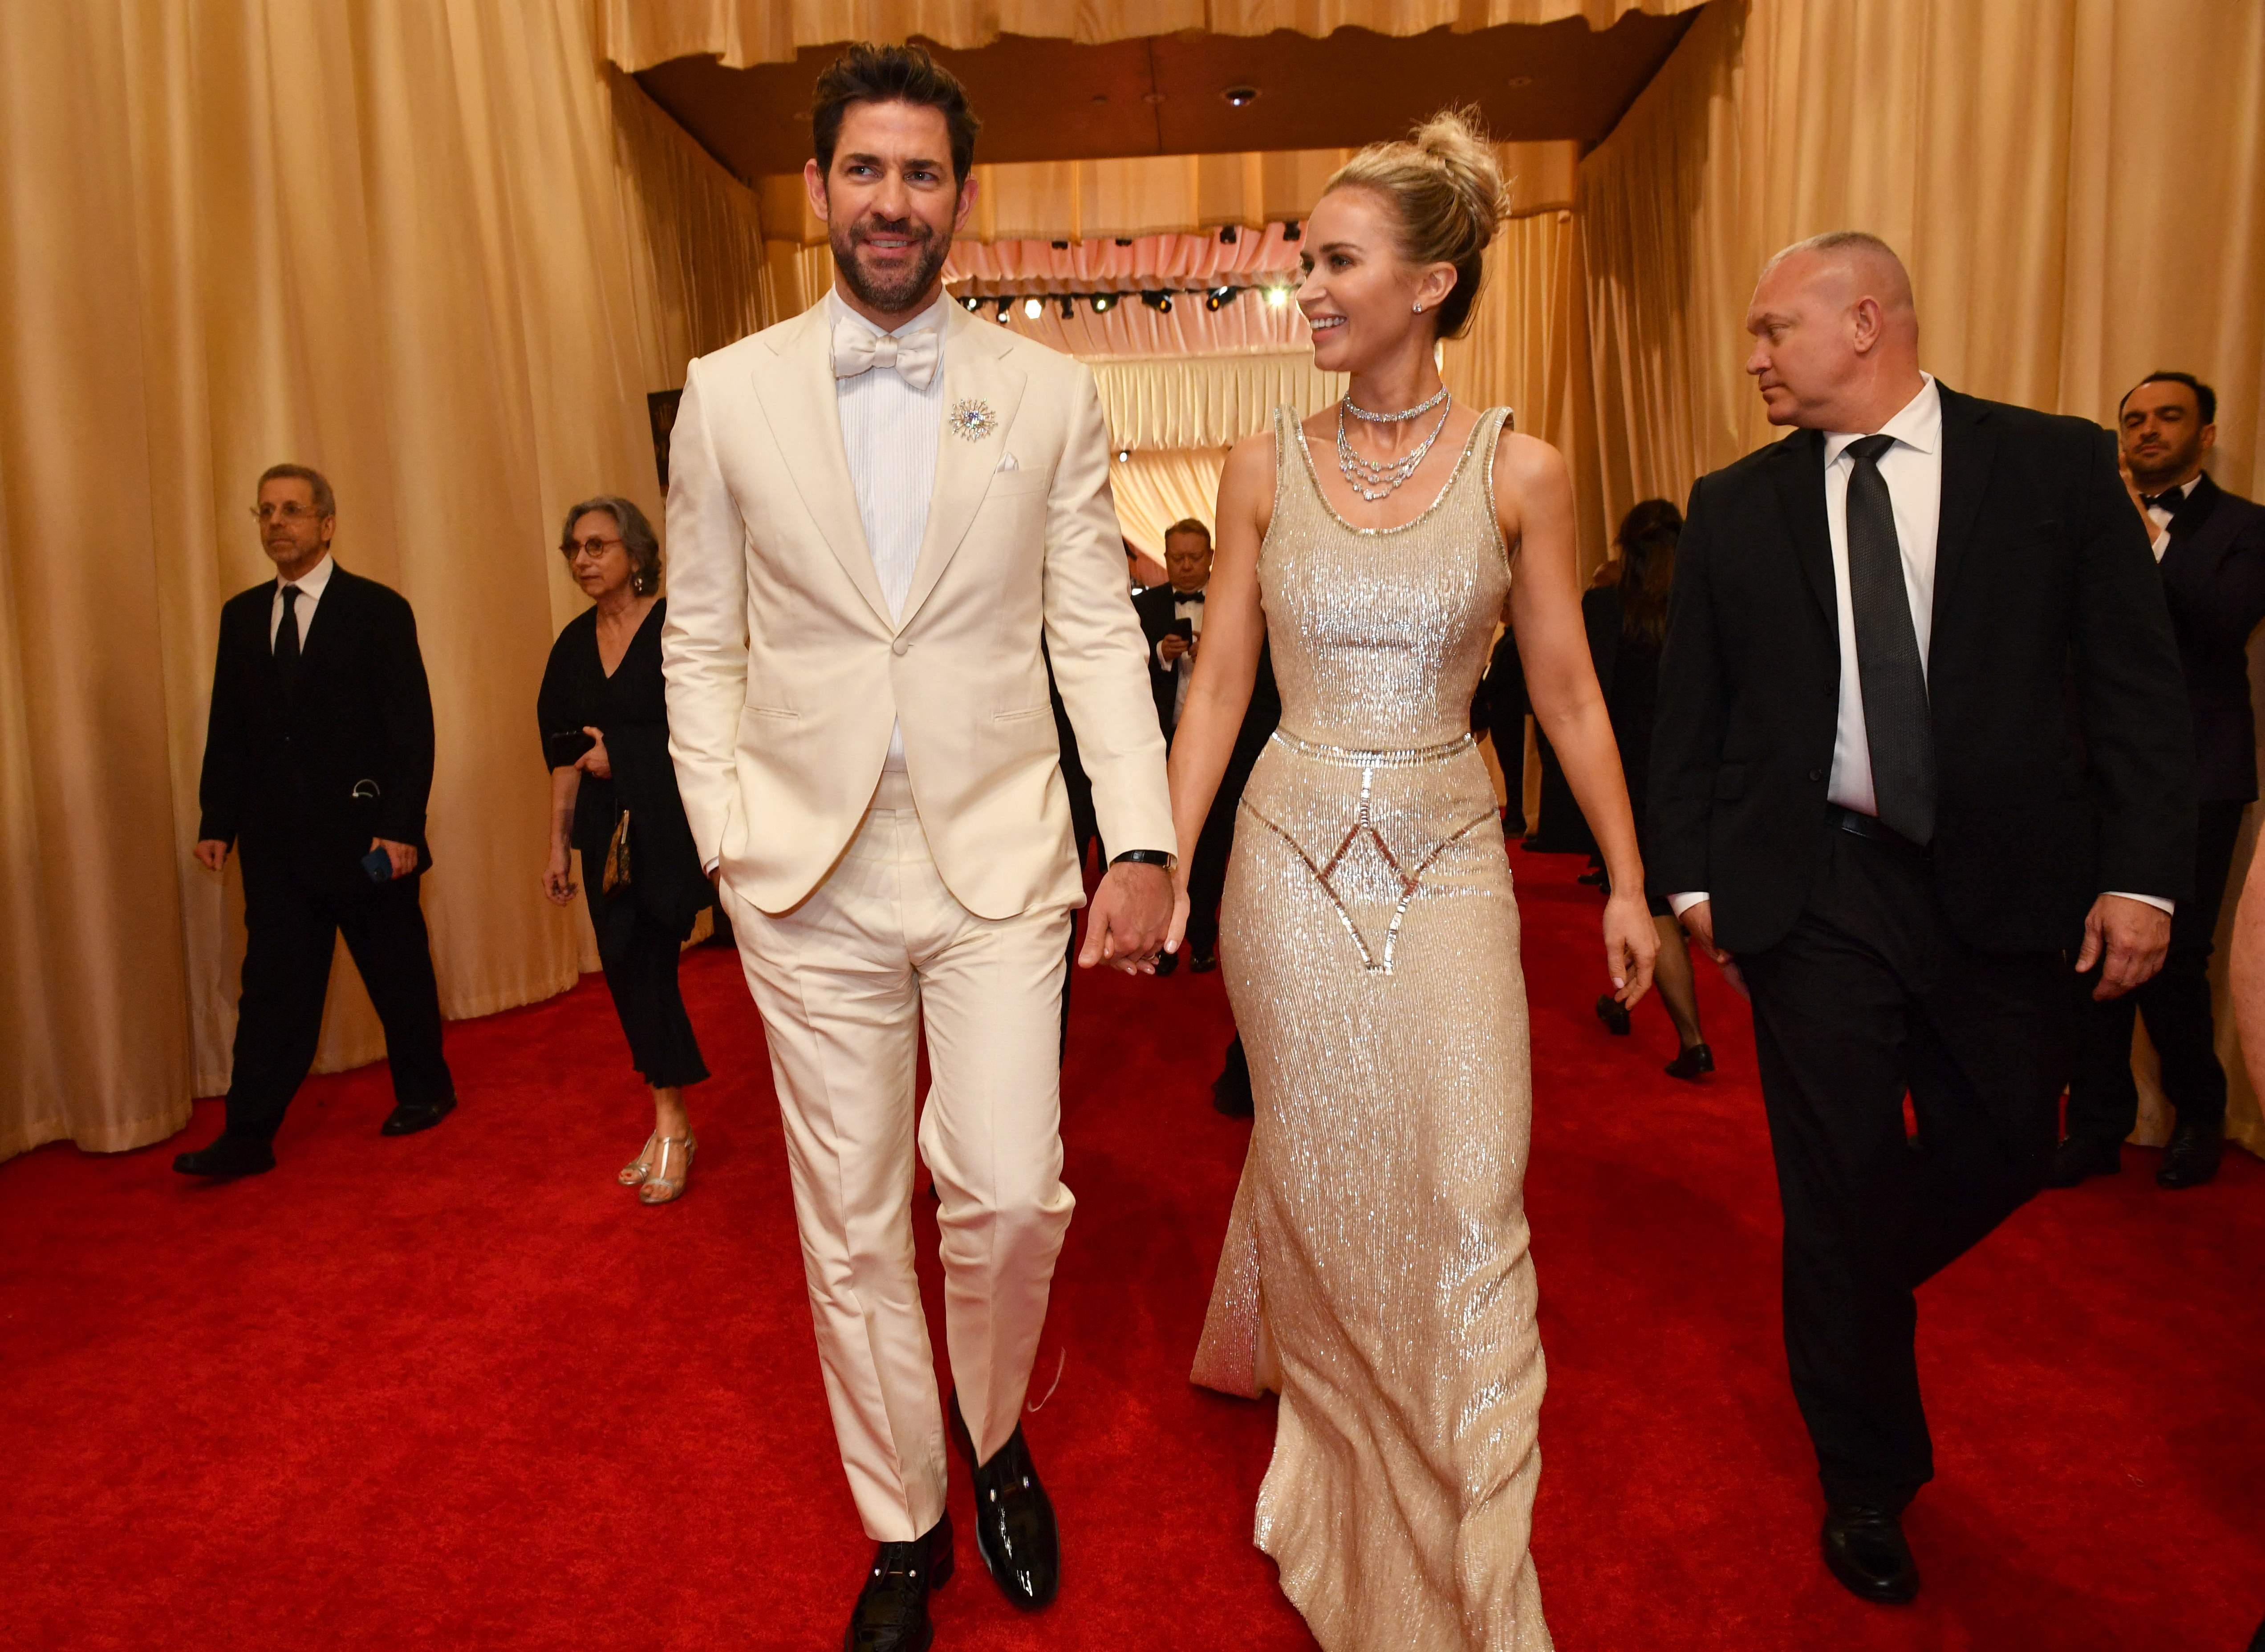 Emily Blunt attended the 2024 Oscars with her husband John Krasinski. She looked stunning in a light gold beaded gown adorned with clear crystals. The gown had sculptural elevated straps and waist which added to its exquisite beauty. The dress was part of Schiaparelli's Spring/Summer 2024 Couture collection